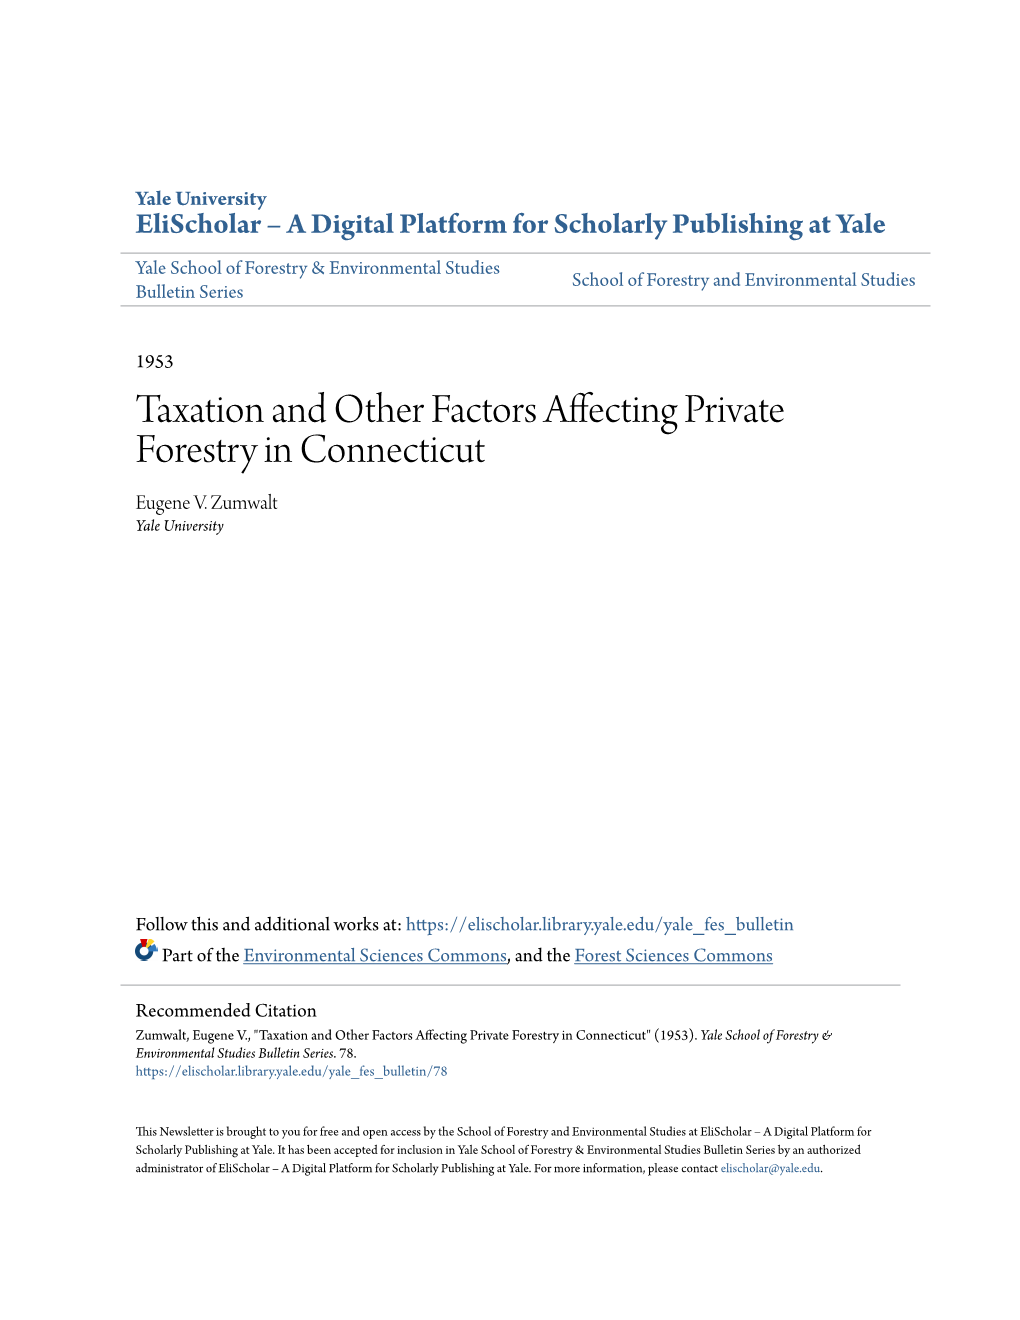 Taxation and Other Factors Affecting Private Forestry in Connecticut Eugene V